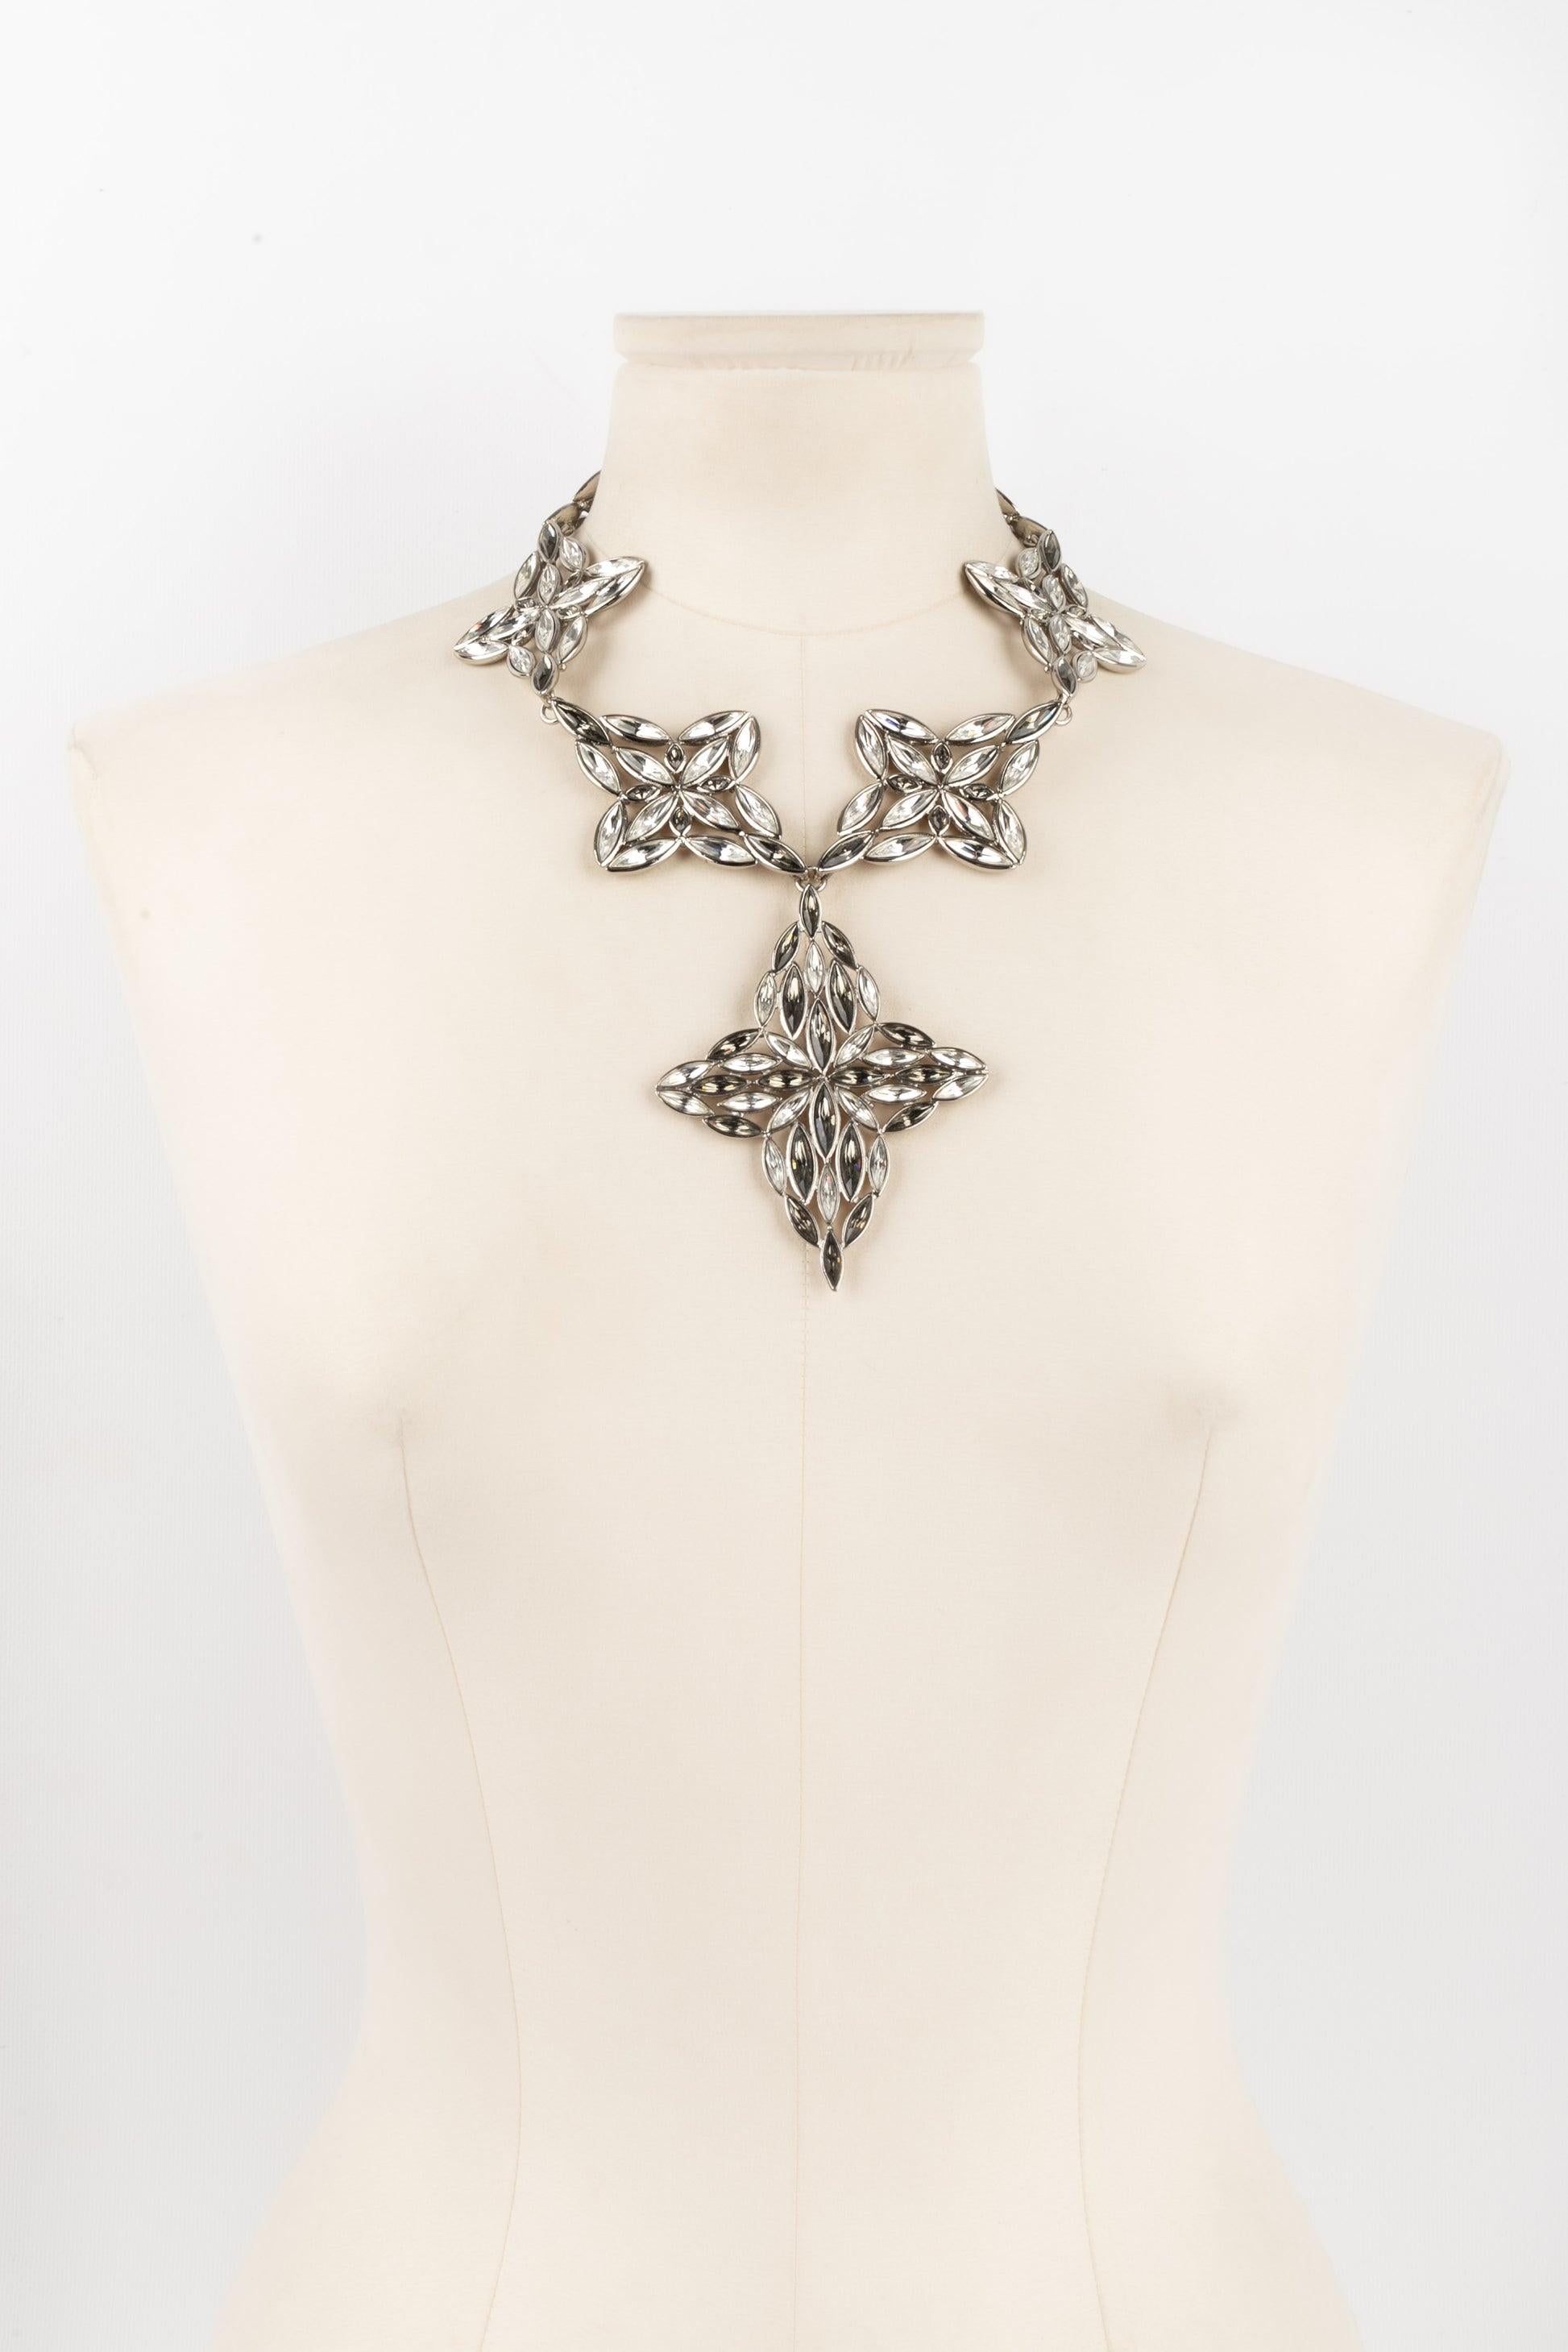 Yves Saint Laurent Silvery Metal Necklace with Rhinestones For Sale 2